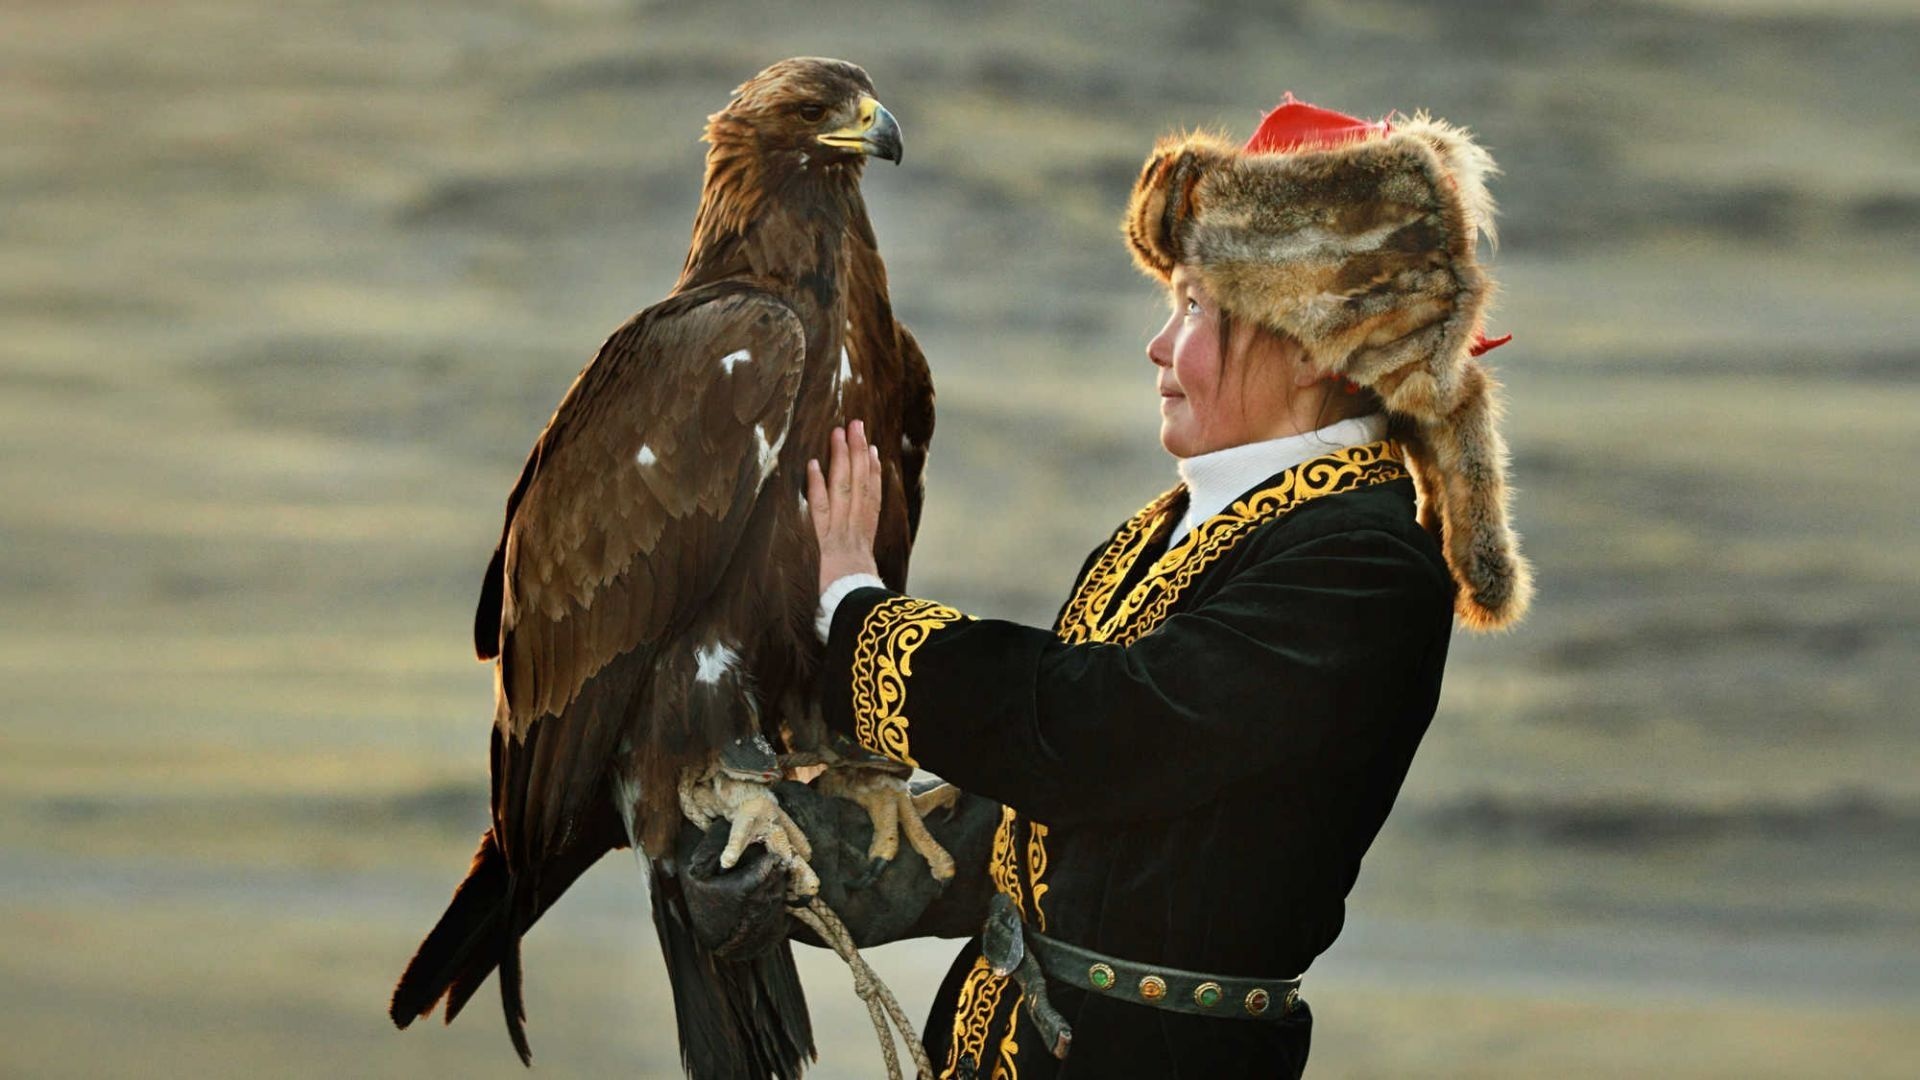 travelling__country_and_the_eagle_huntress.jpg